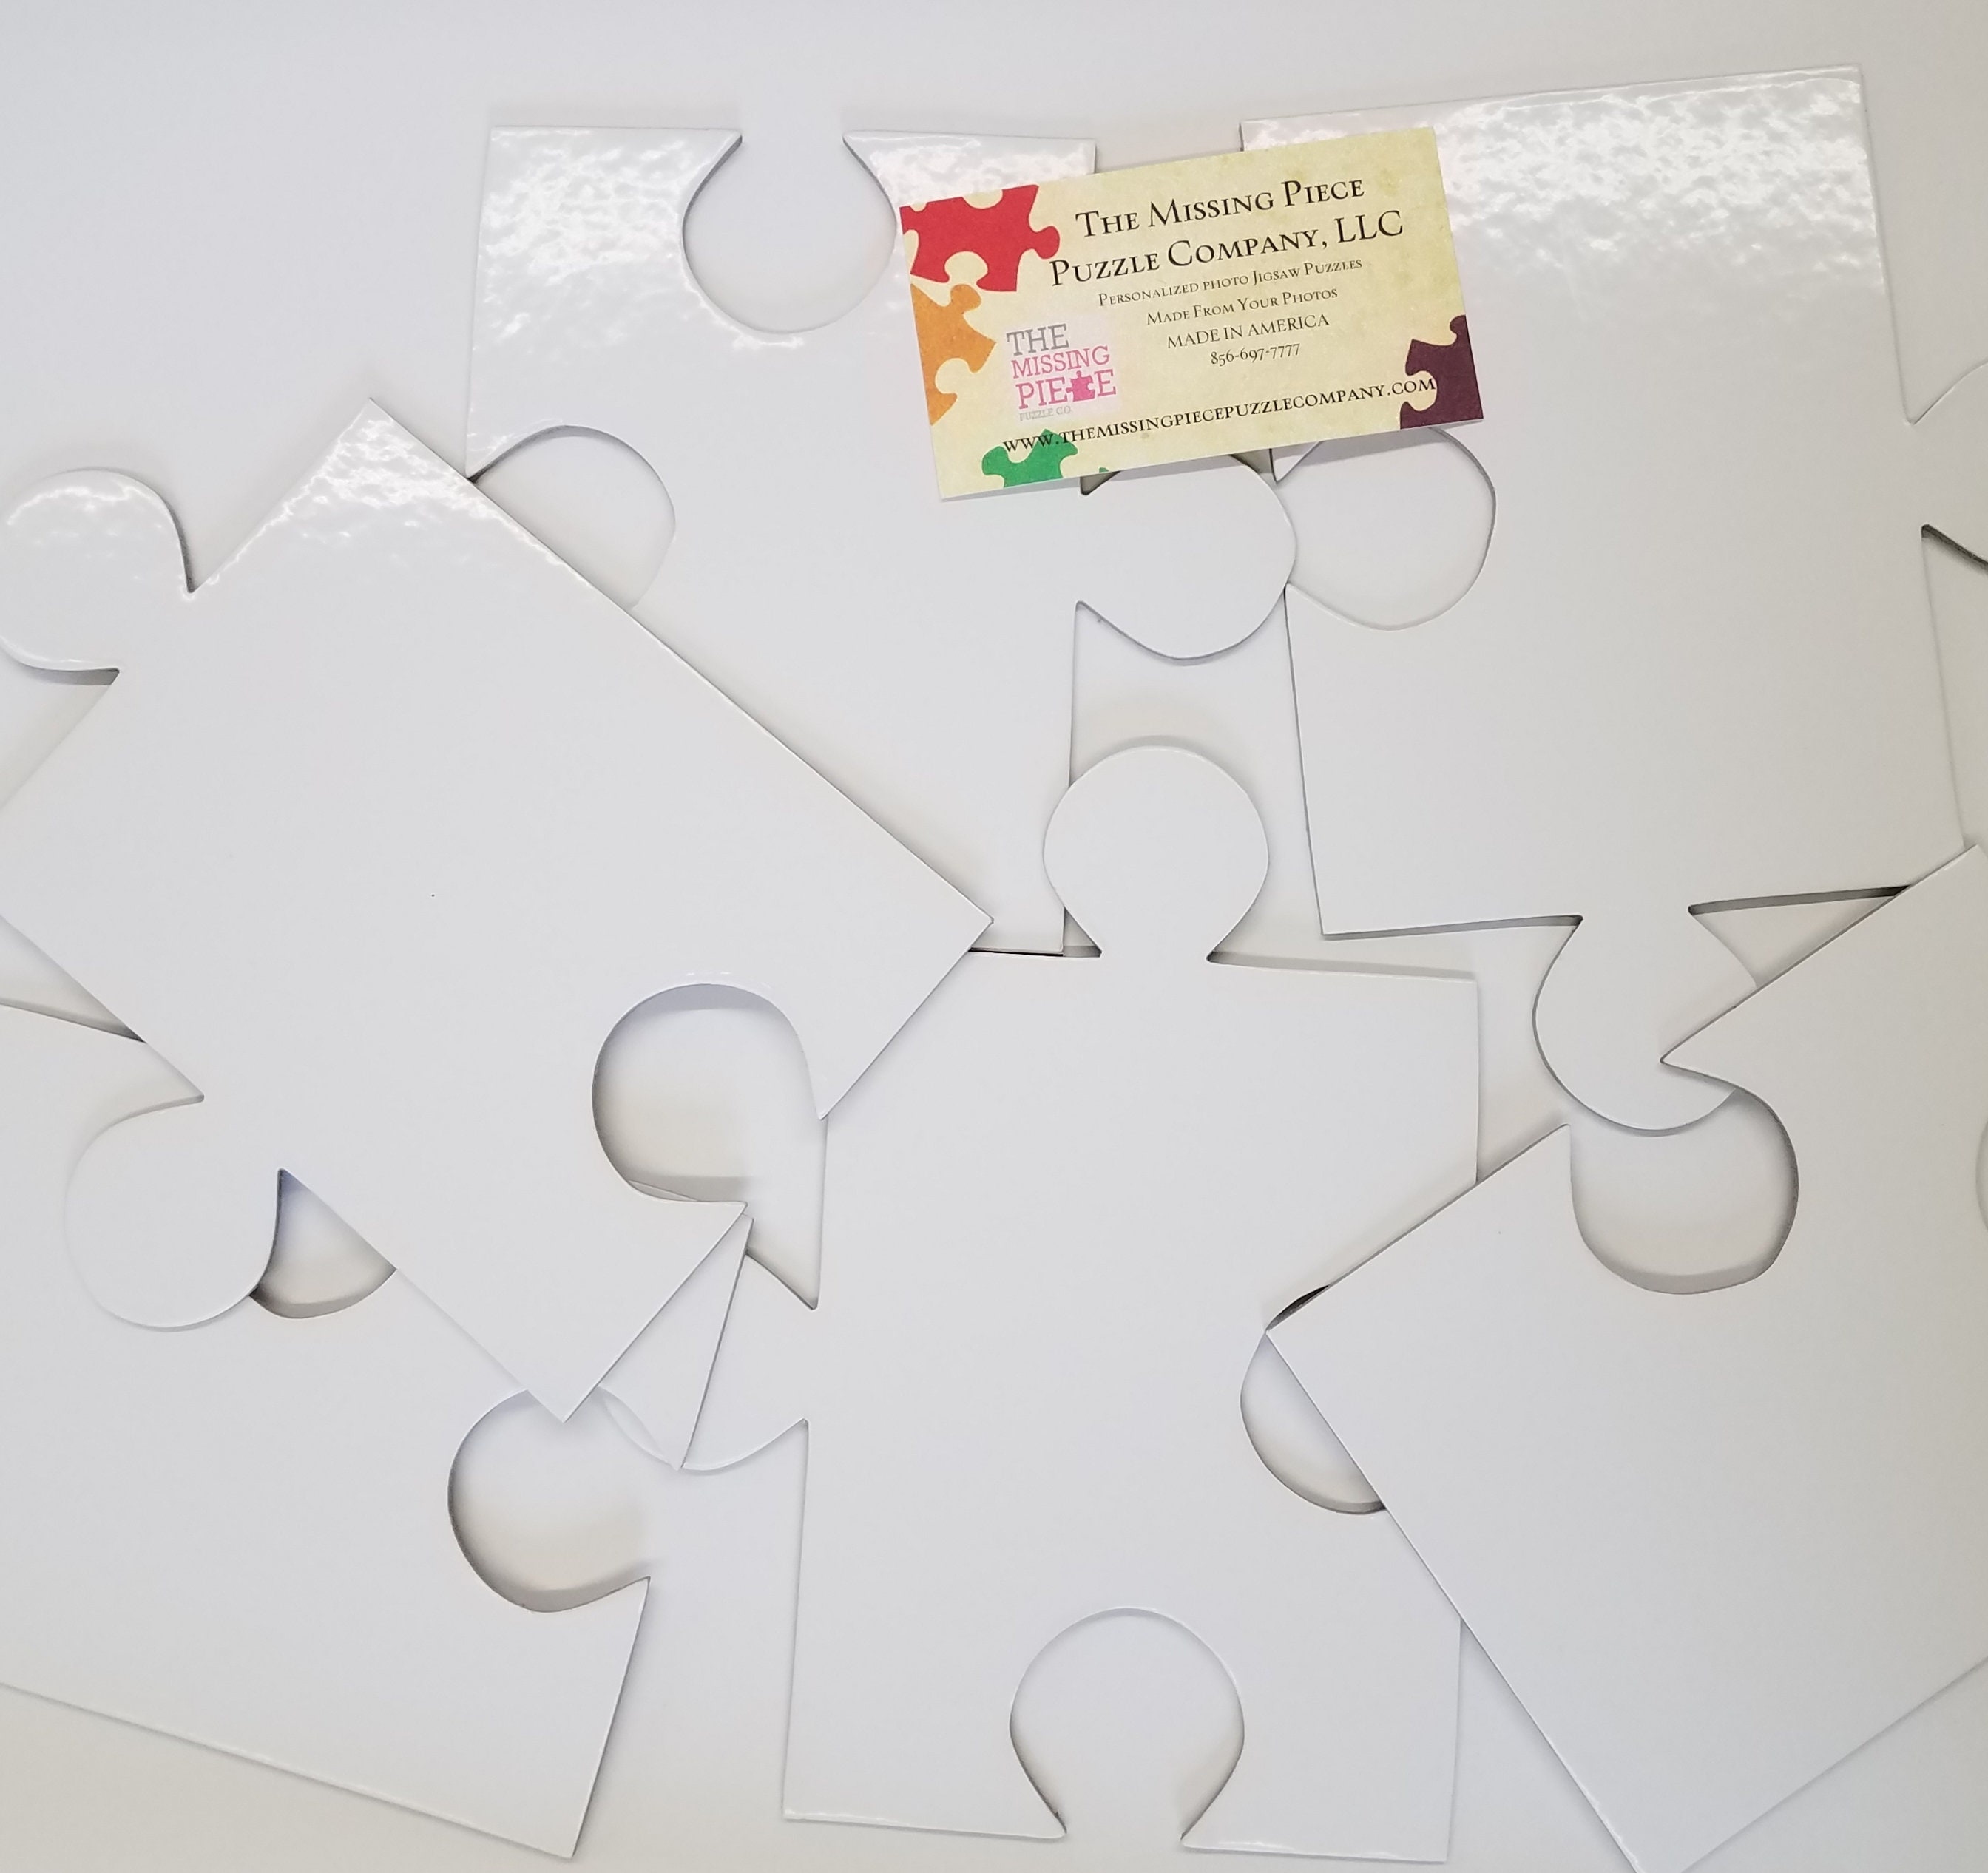 Blank White Puzzle for a Unique Wedding Guest Book - The Missing Piece  Puzzle Company